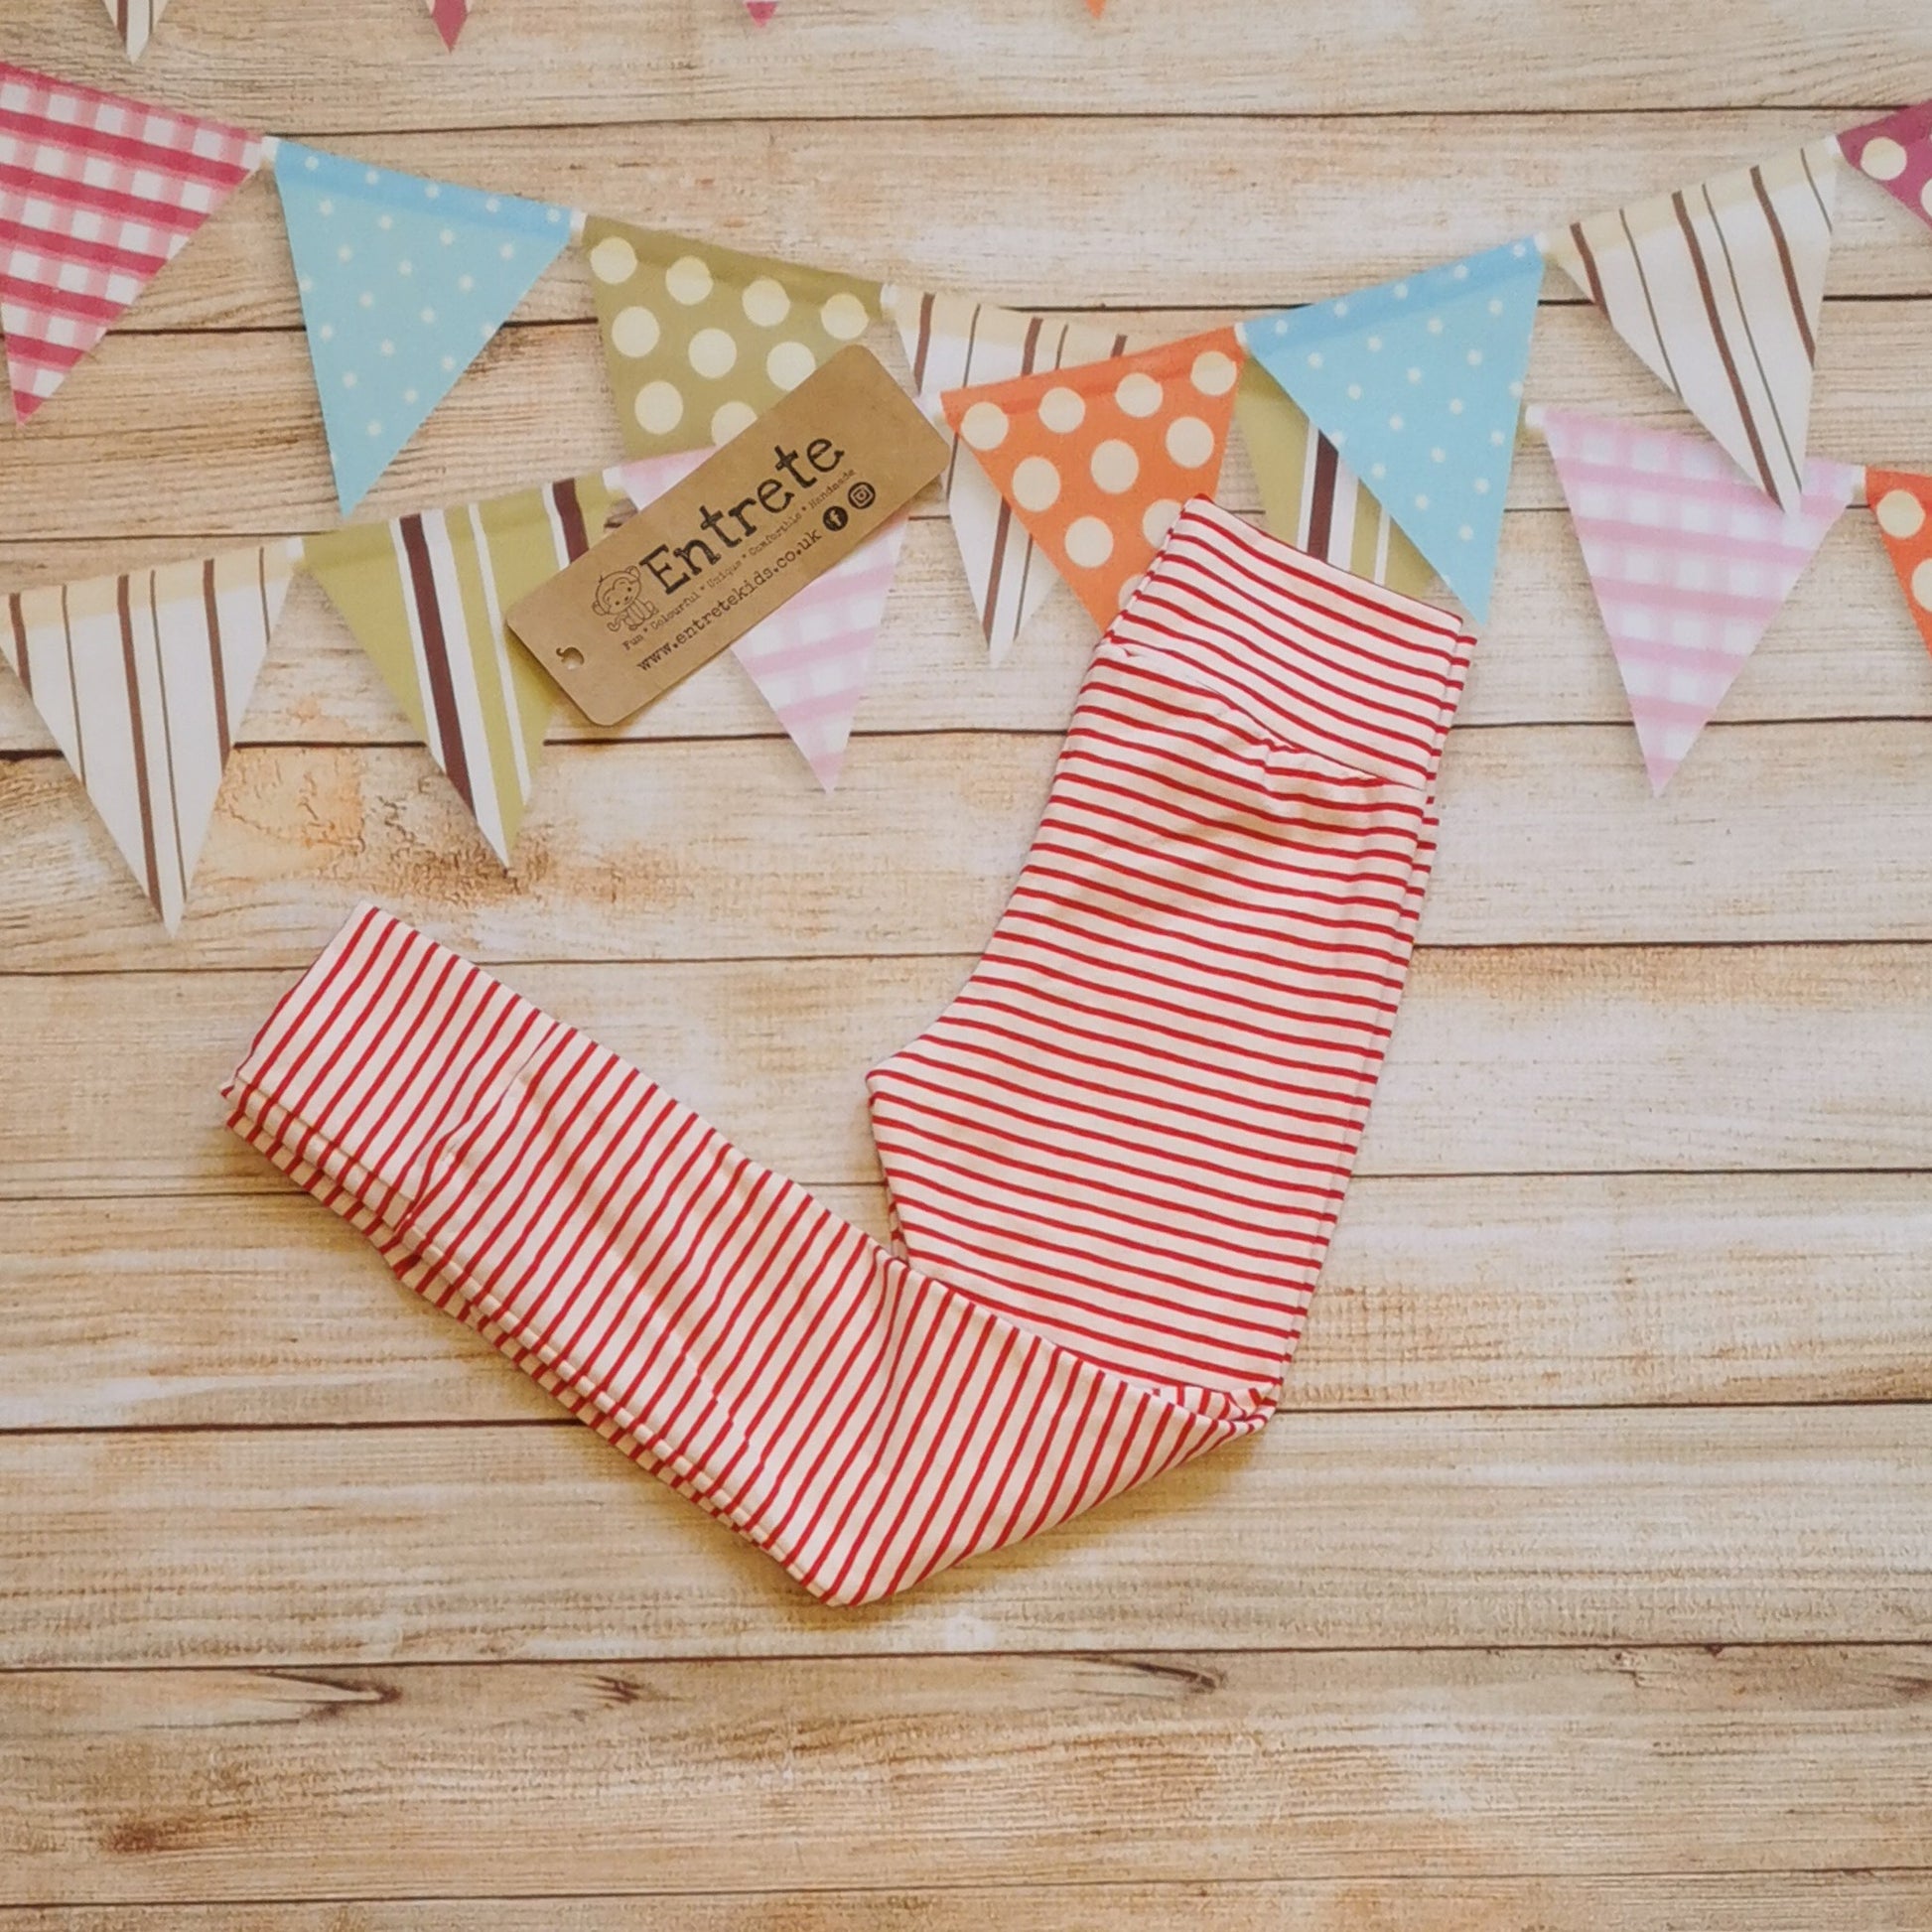 Soft and comfortable leggings handmade using red striped cotton jersey.